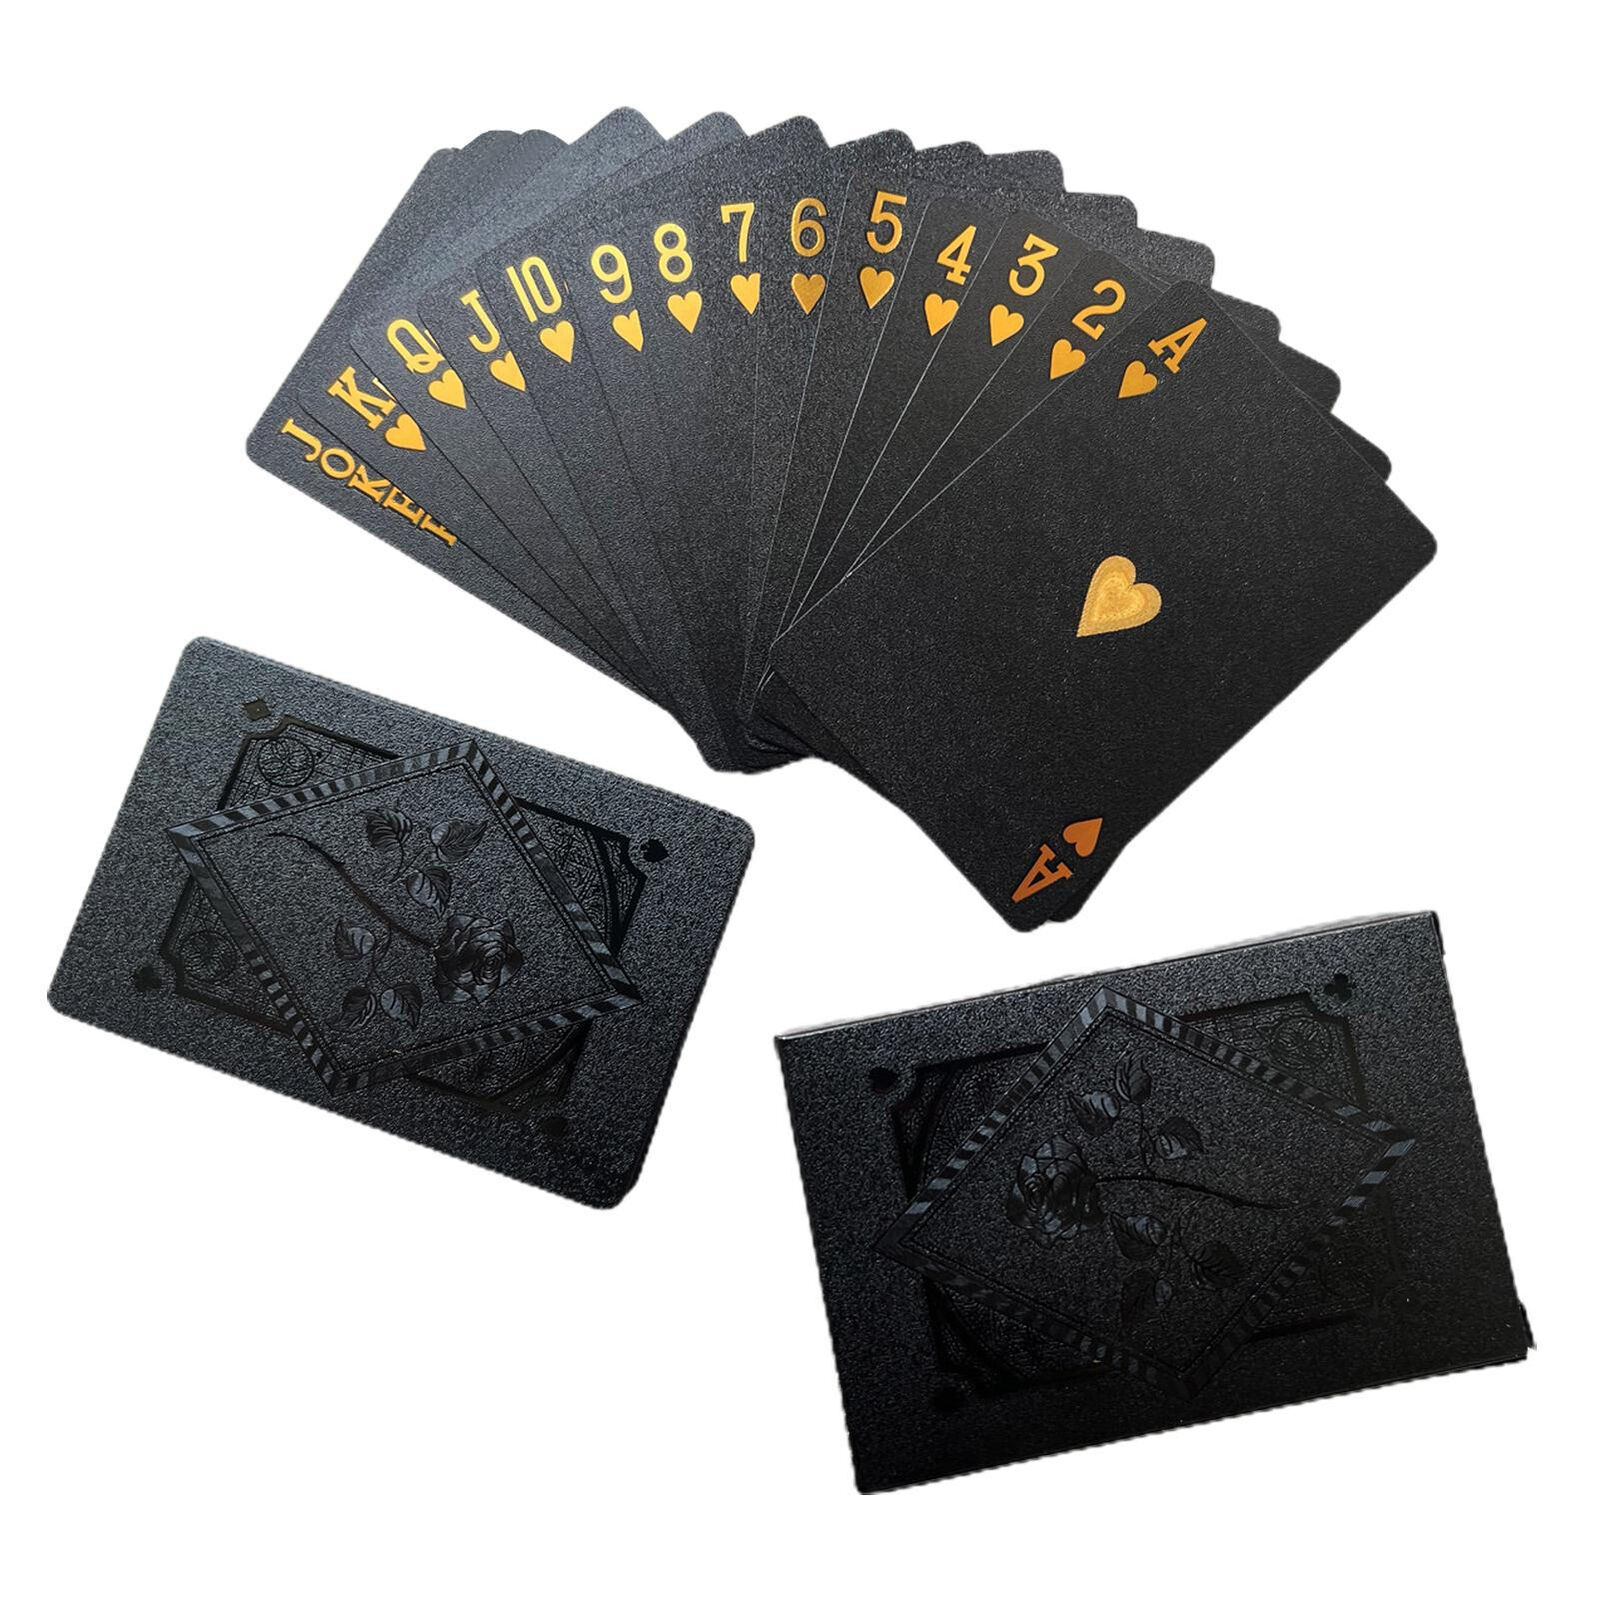 Black Foil Poker Set of 54 Exquisite Poker Foil Playing Cards Interative Toys